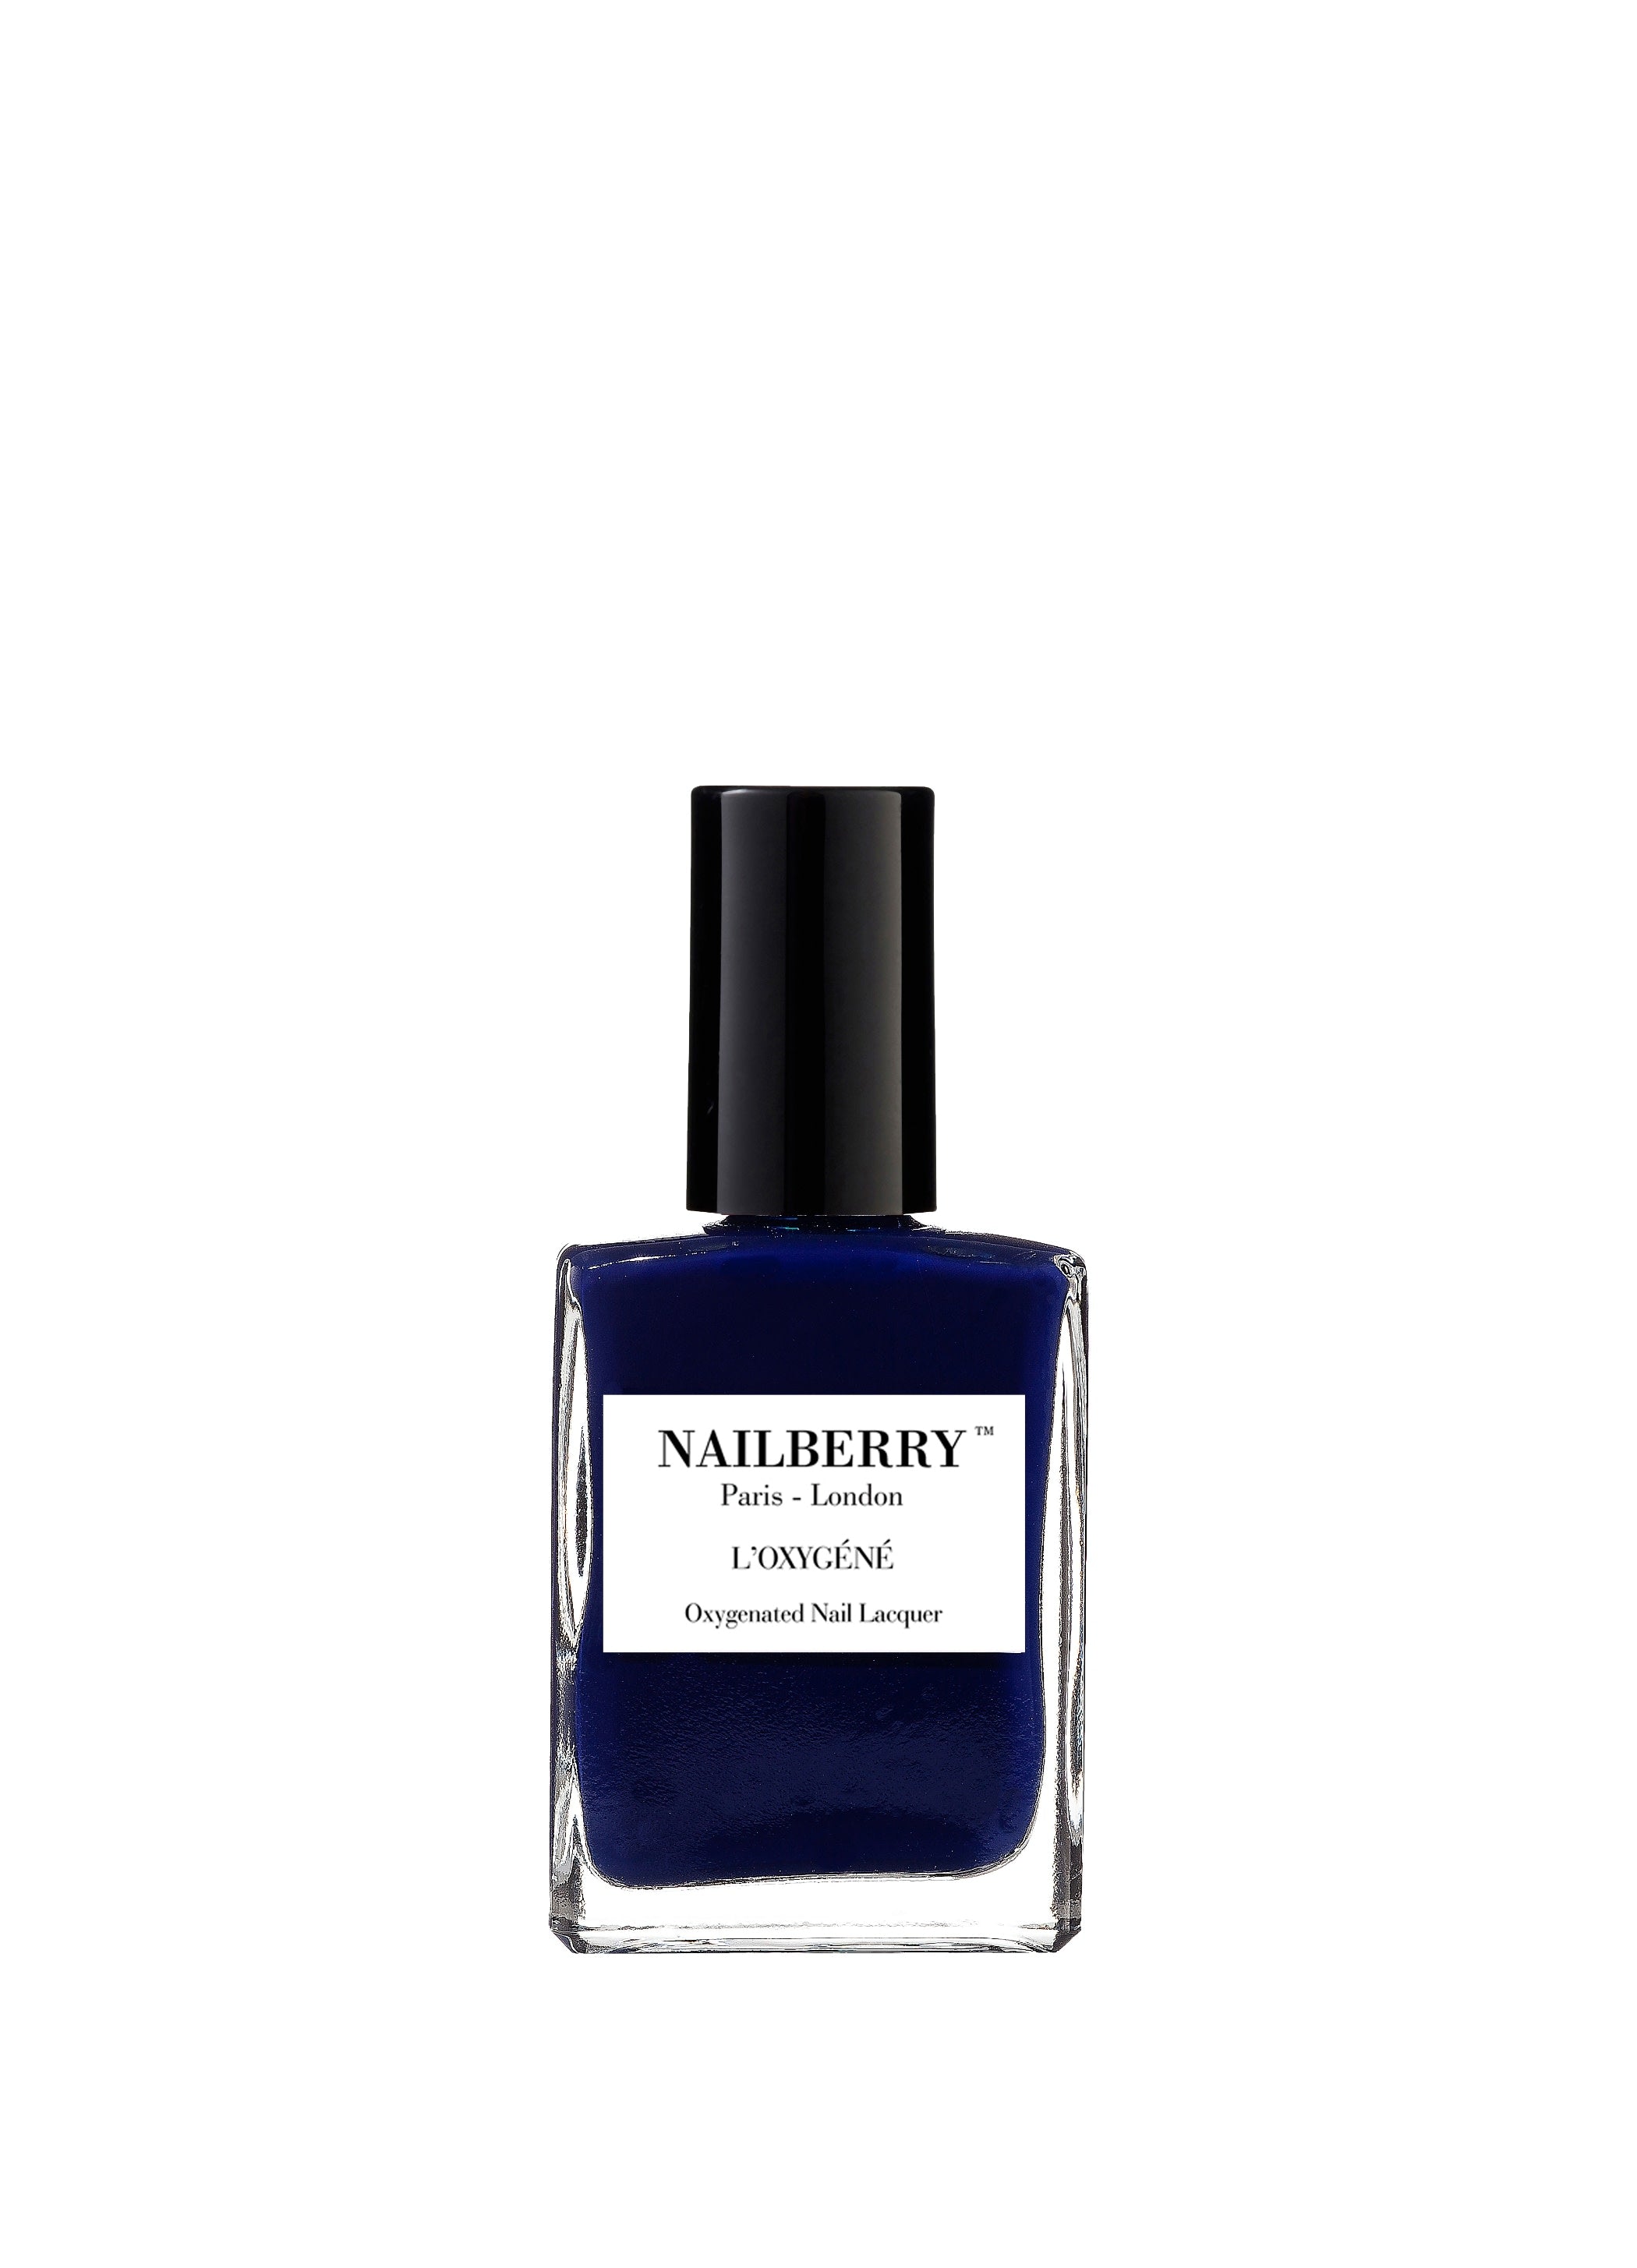 NUMBER 69 NAILBERRY